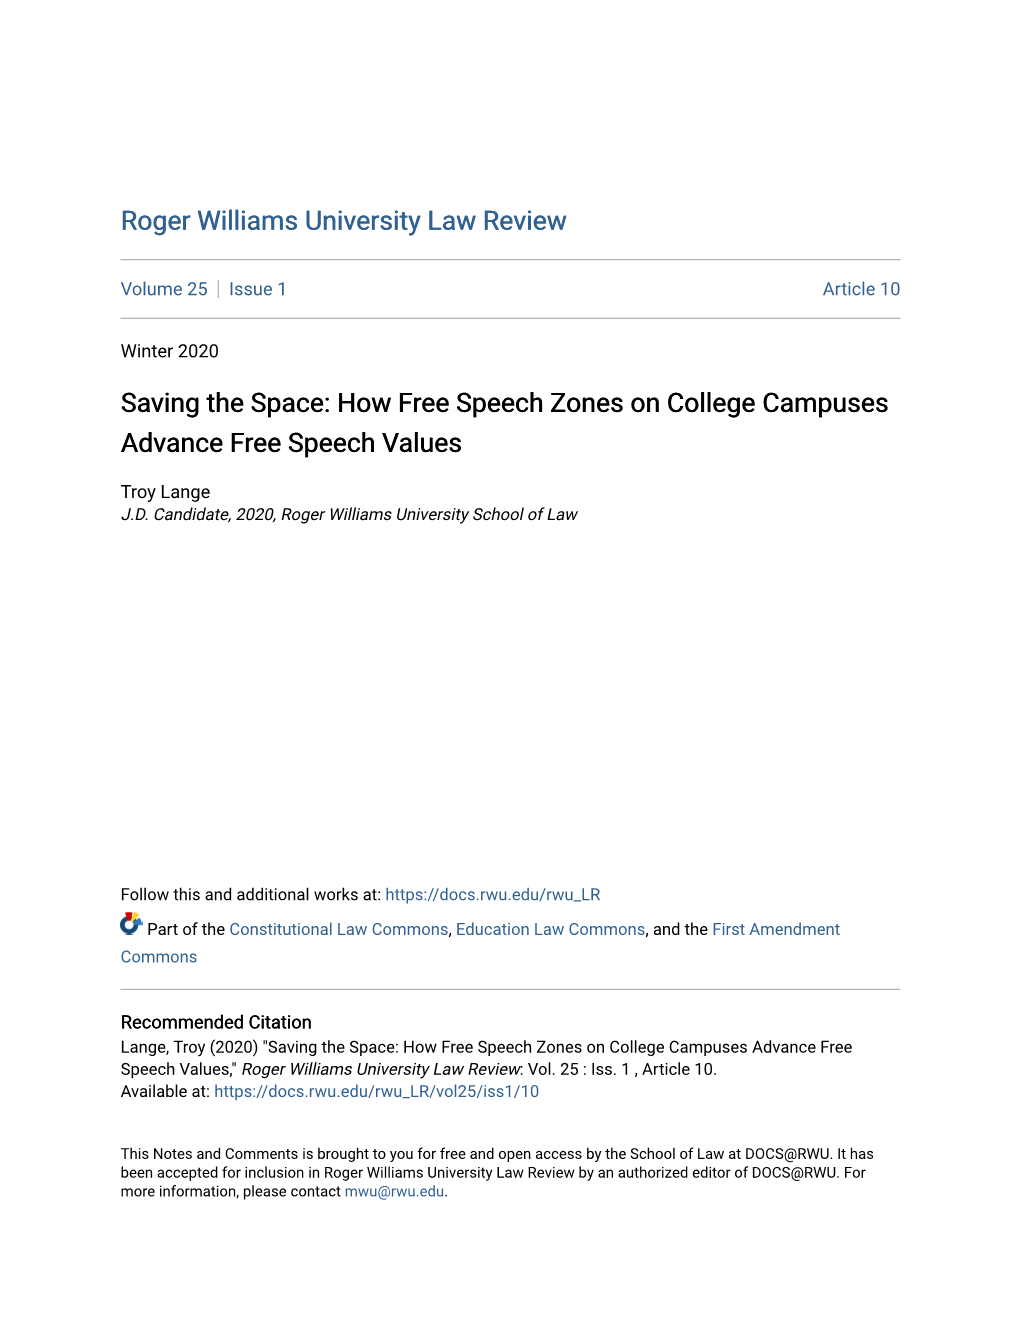 How Free Speech Zones on College Campuses Advance Free Speech Values